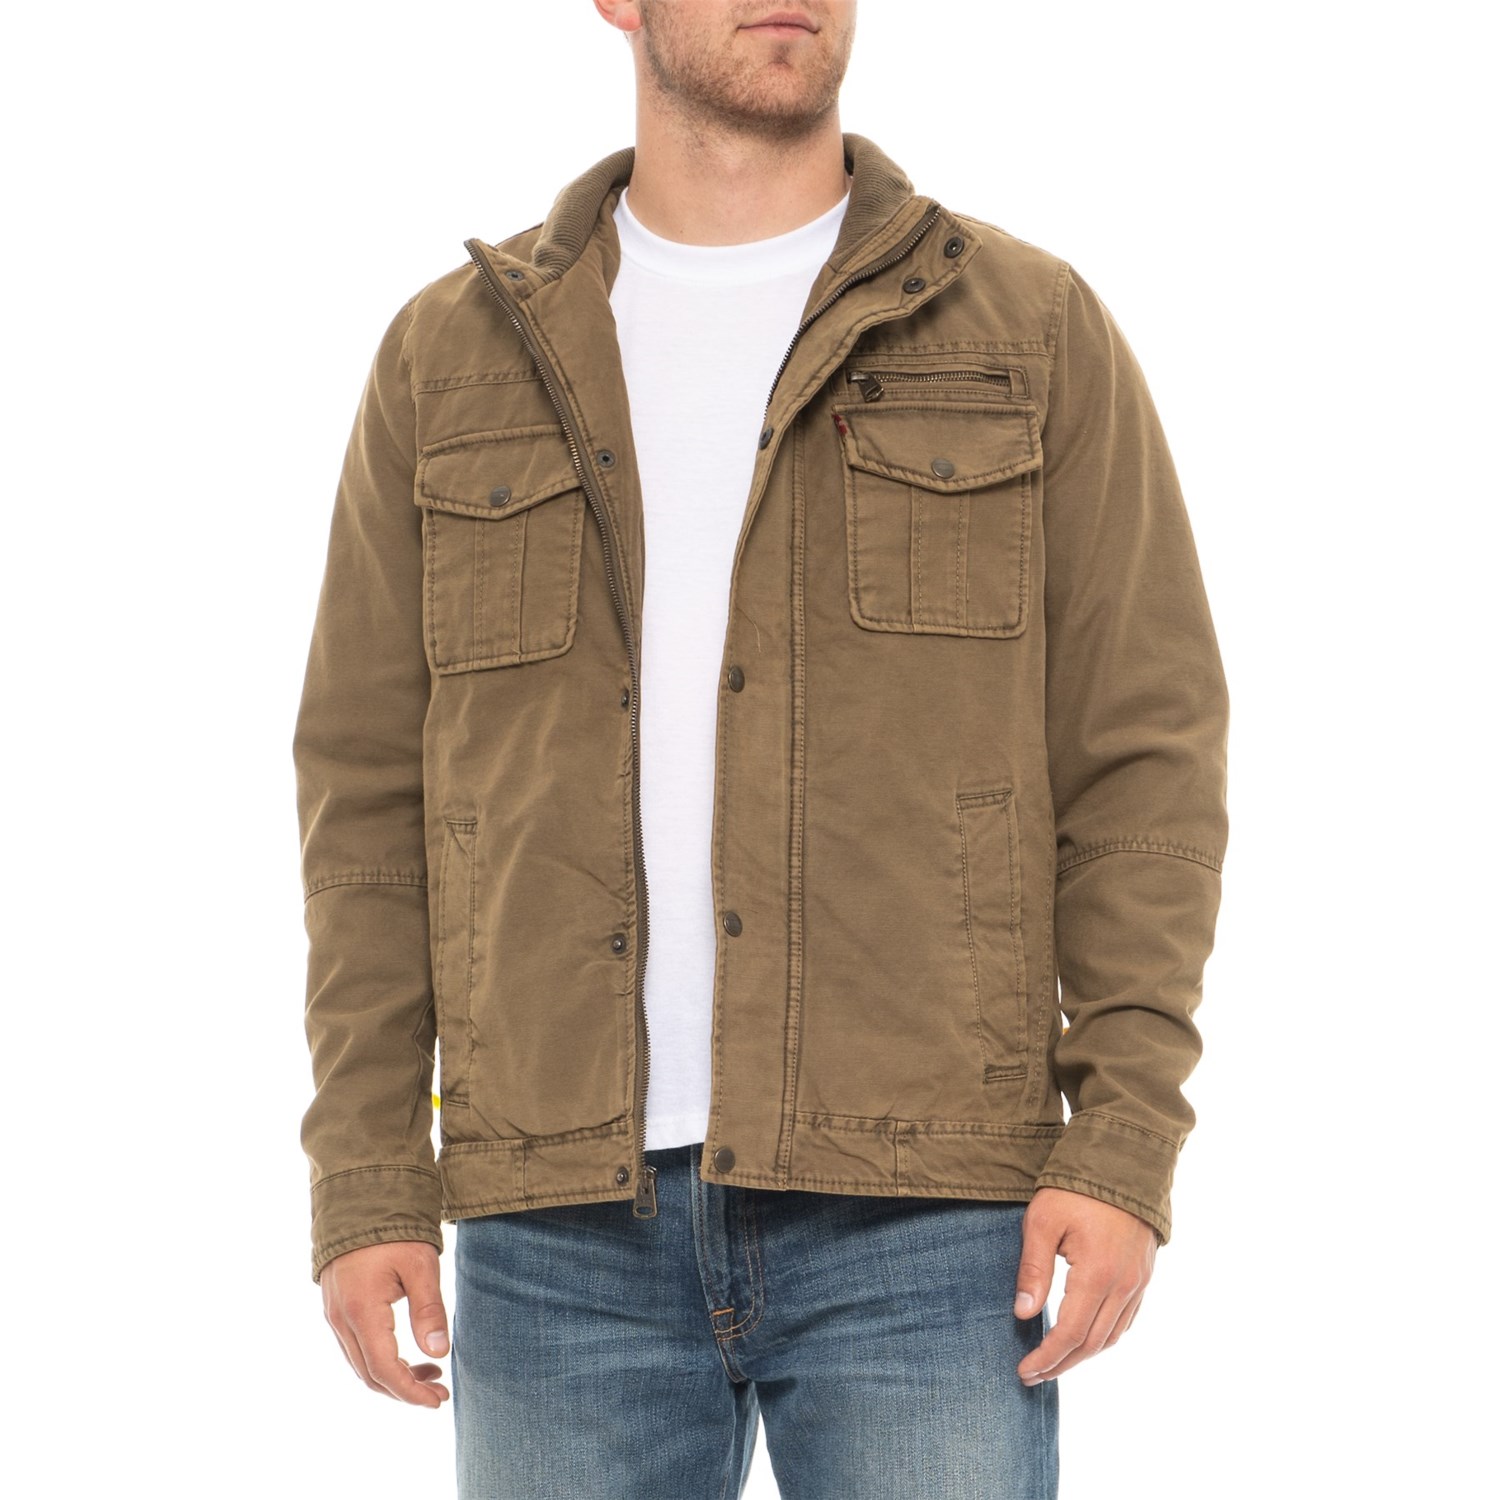 Levi's Two-Pocket Military Jacket (For Men) - Save 67%